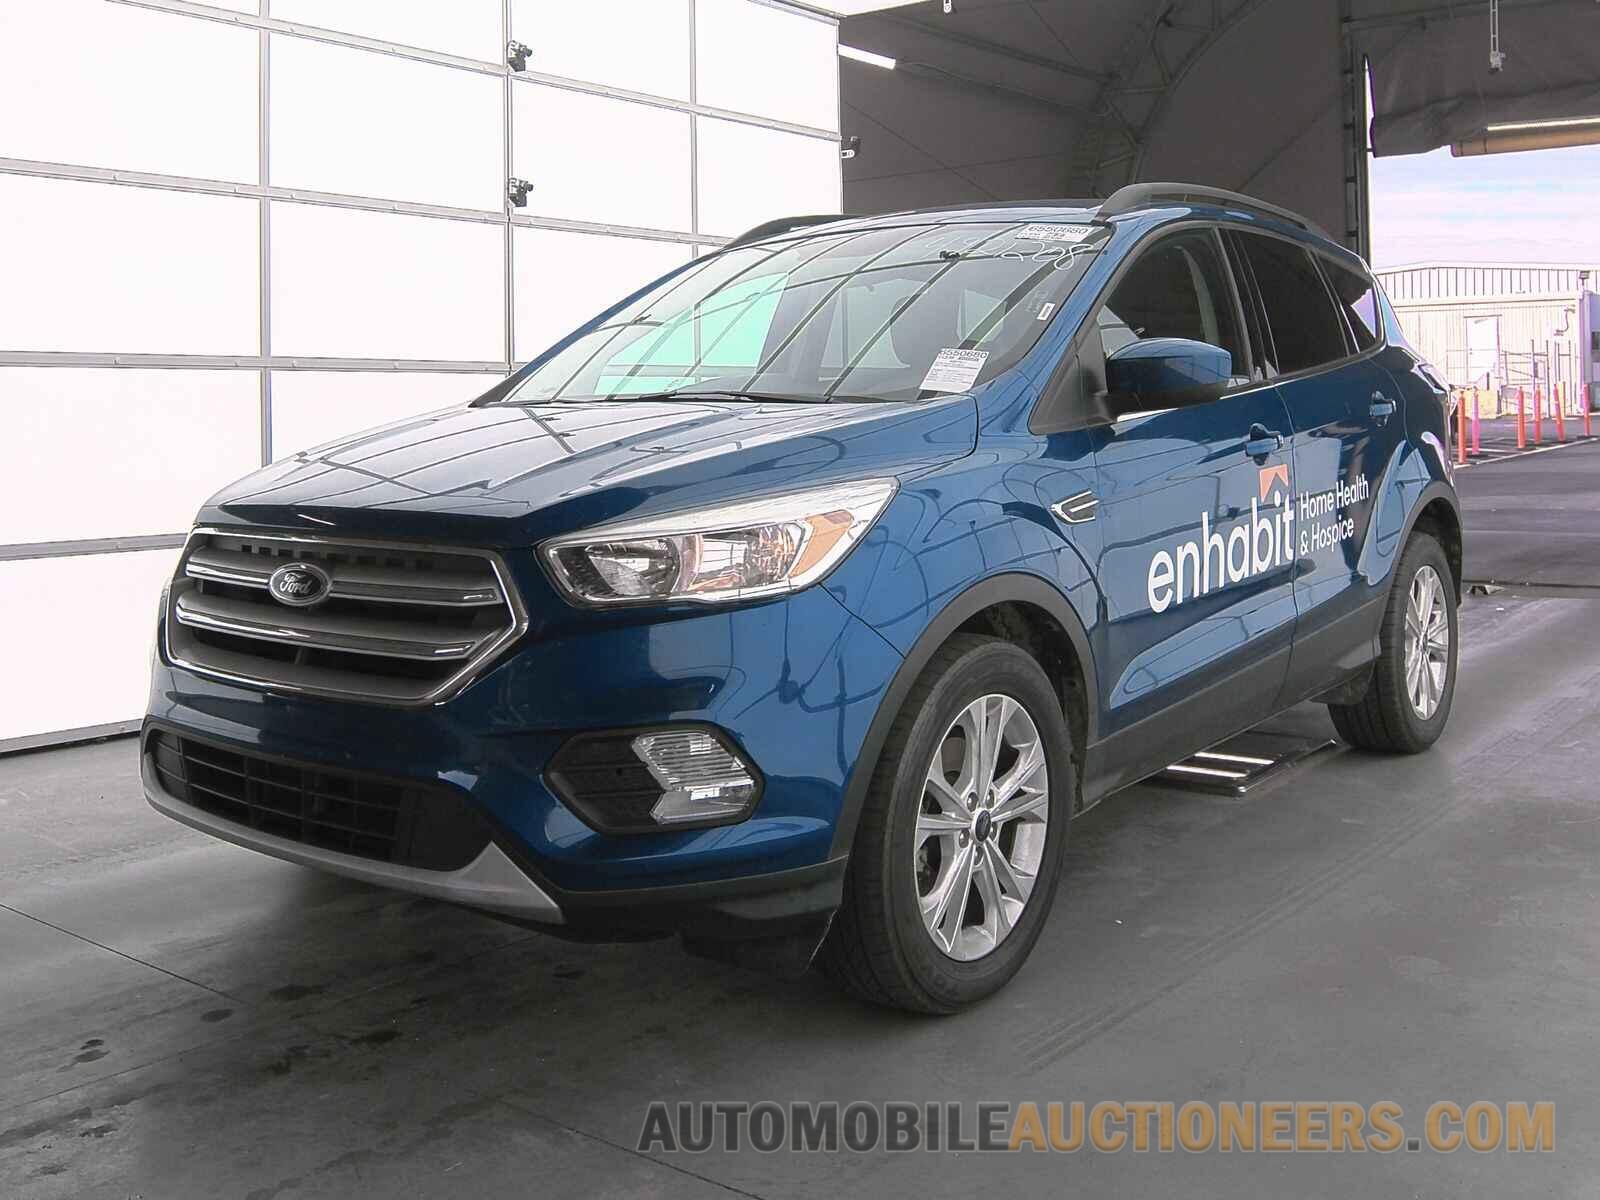 1FMCU0GD0JUD38840 Ford Escape 2018